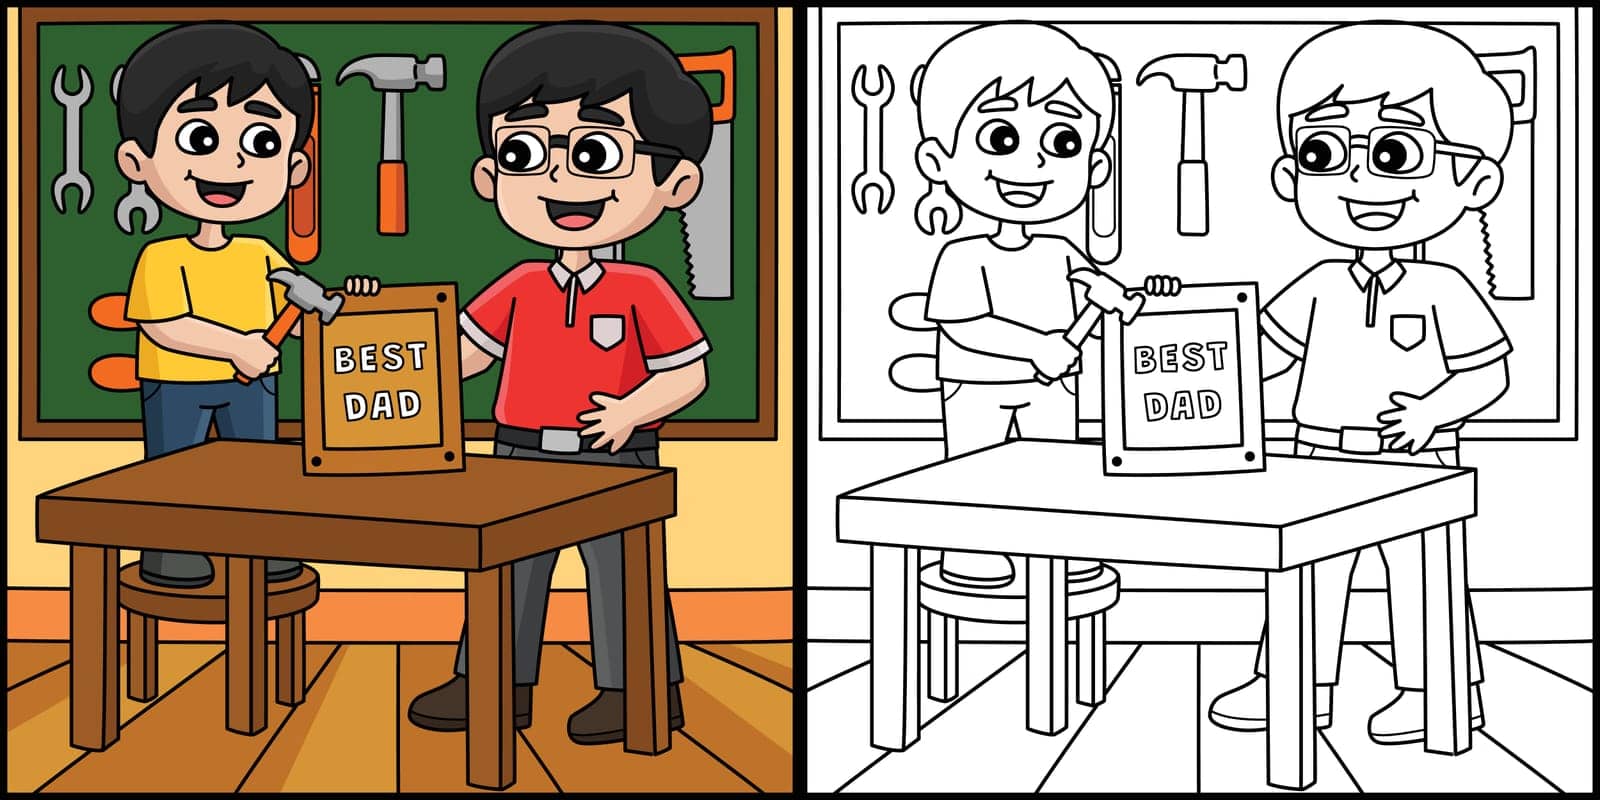 This coloring page shows a Father and Son doing Carpentry. One side of this illustration is colored and serves as an inspiration for children.